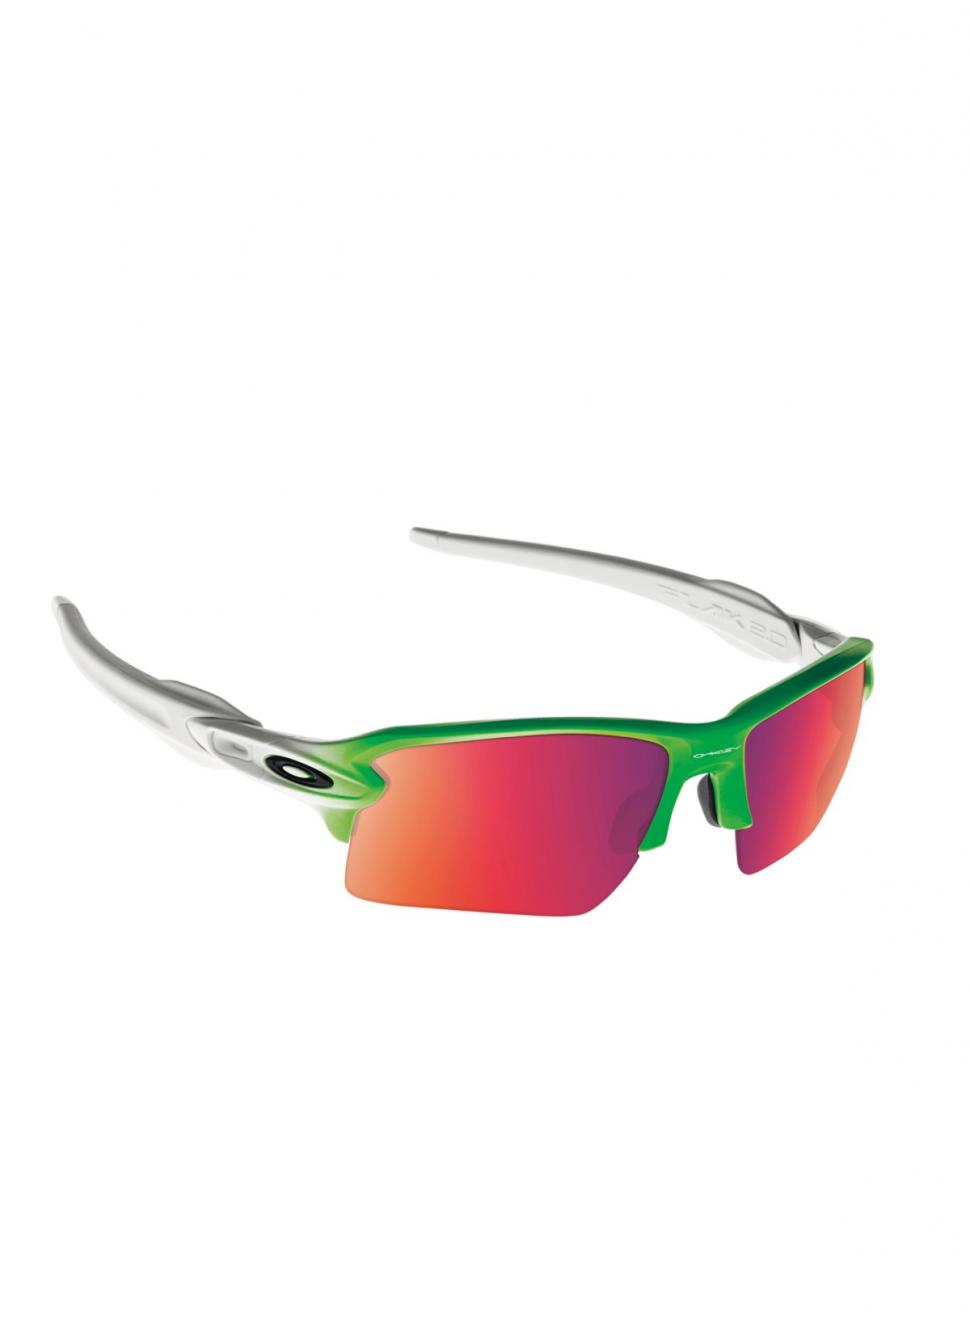 Oakley launches Green Fade eyewear collection 